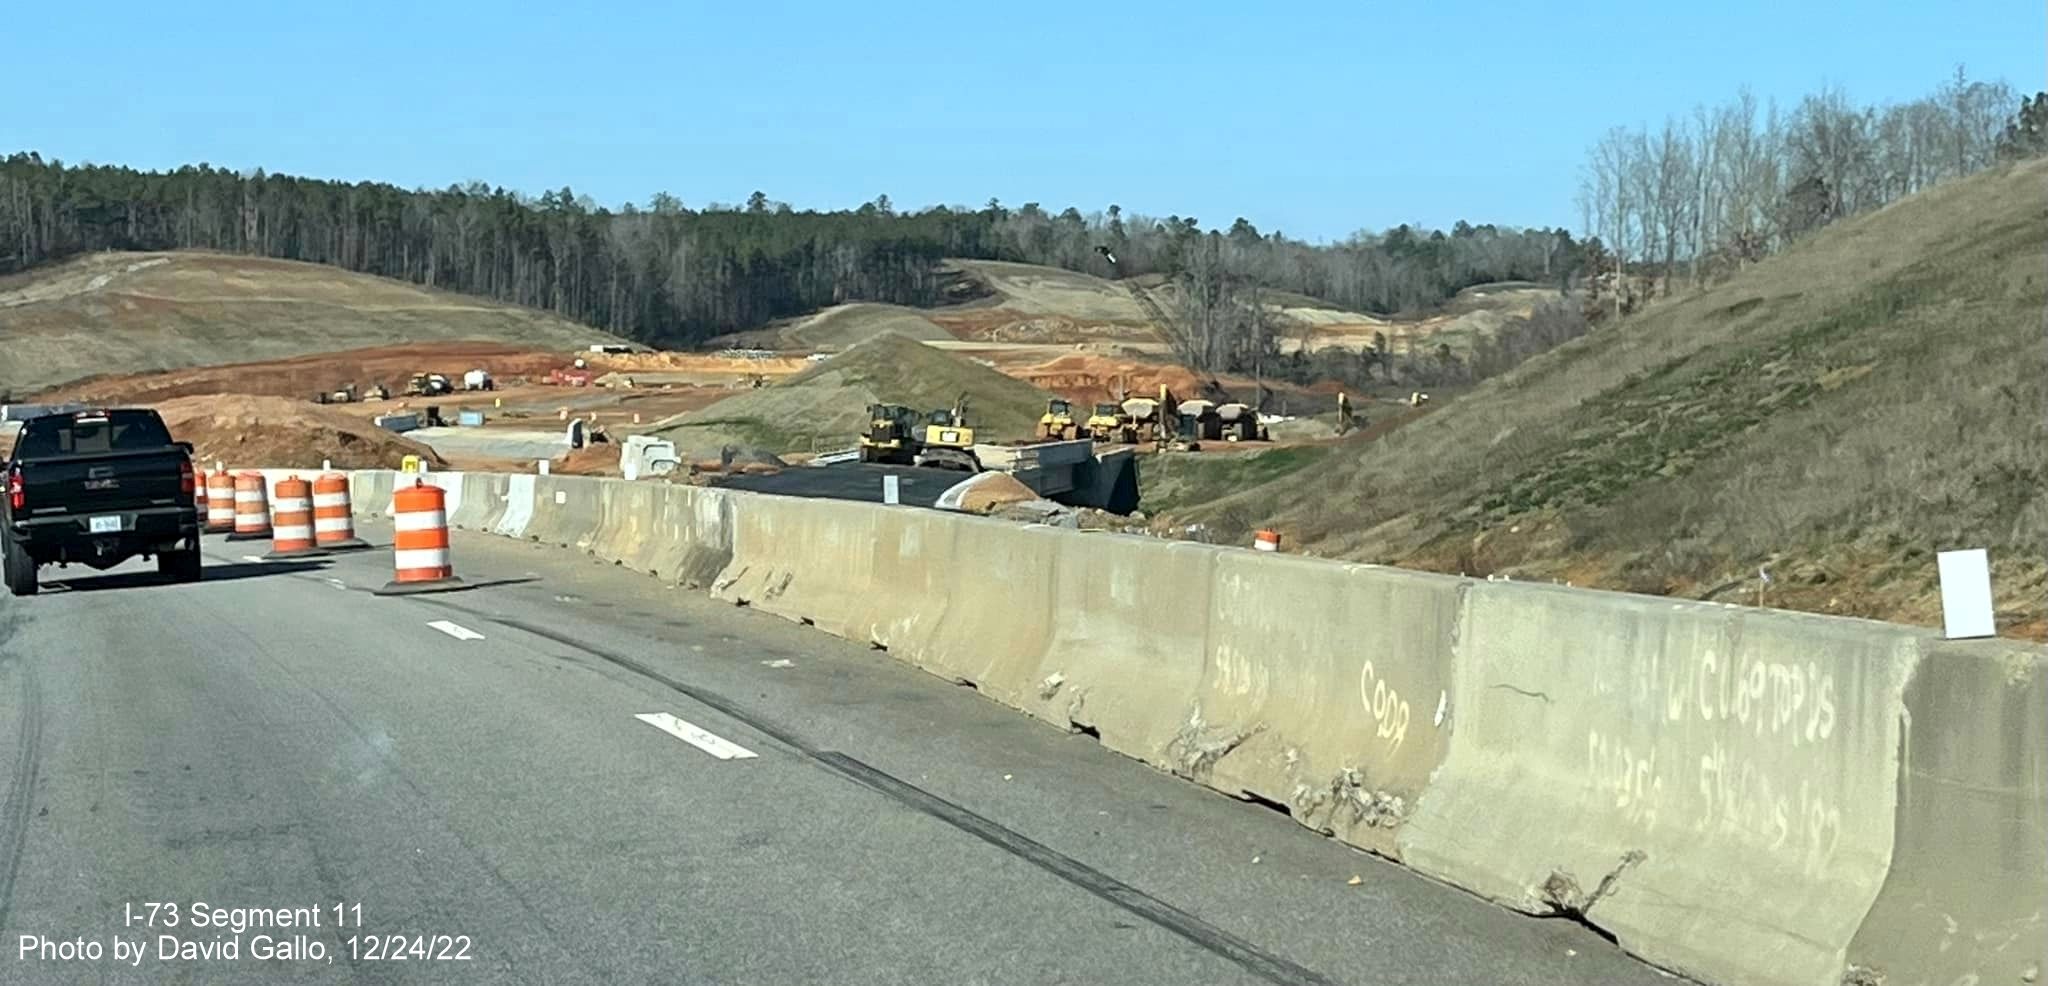 Image of concrete barrier along US 74 West at future I-73/I-74 Rockingham Bypass off-ramp, 
                                            photo by David Gallo, December 2022